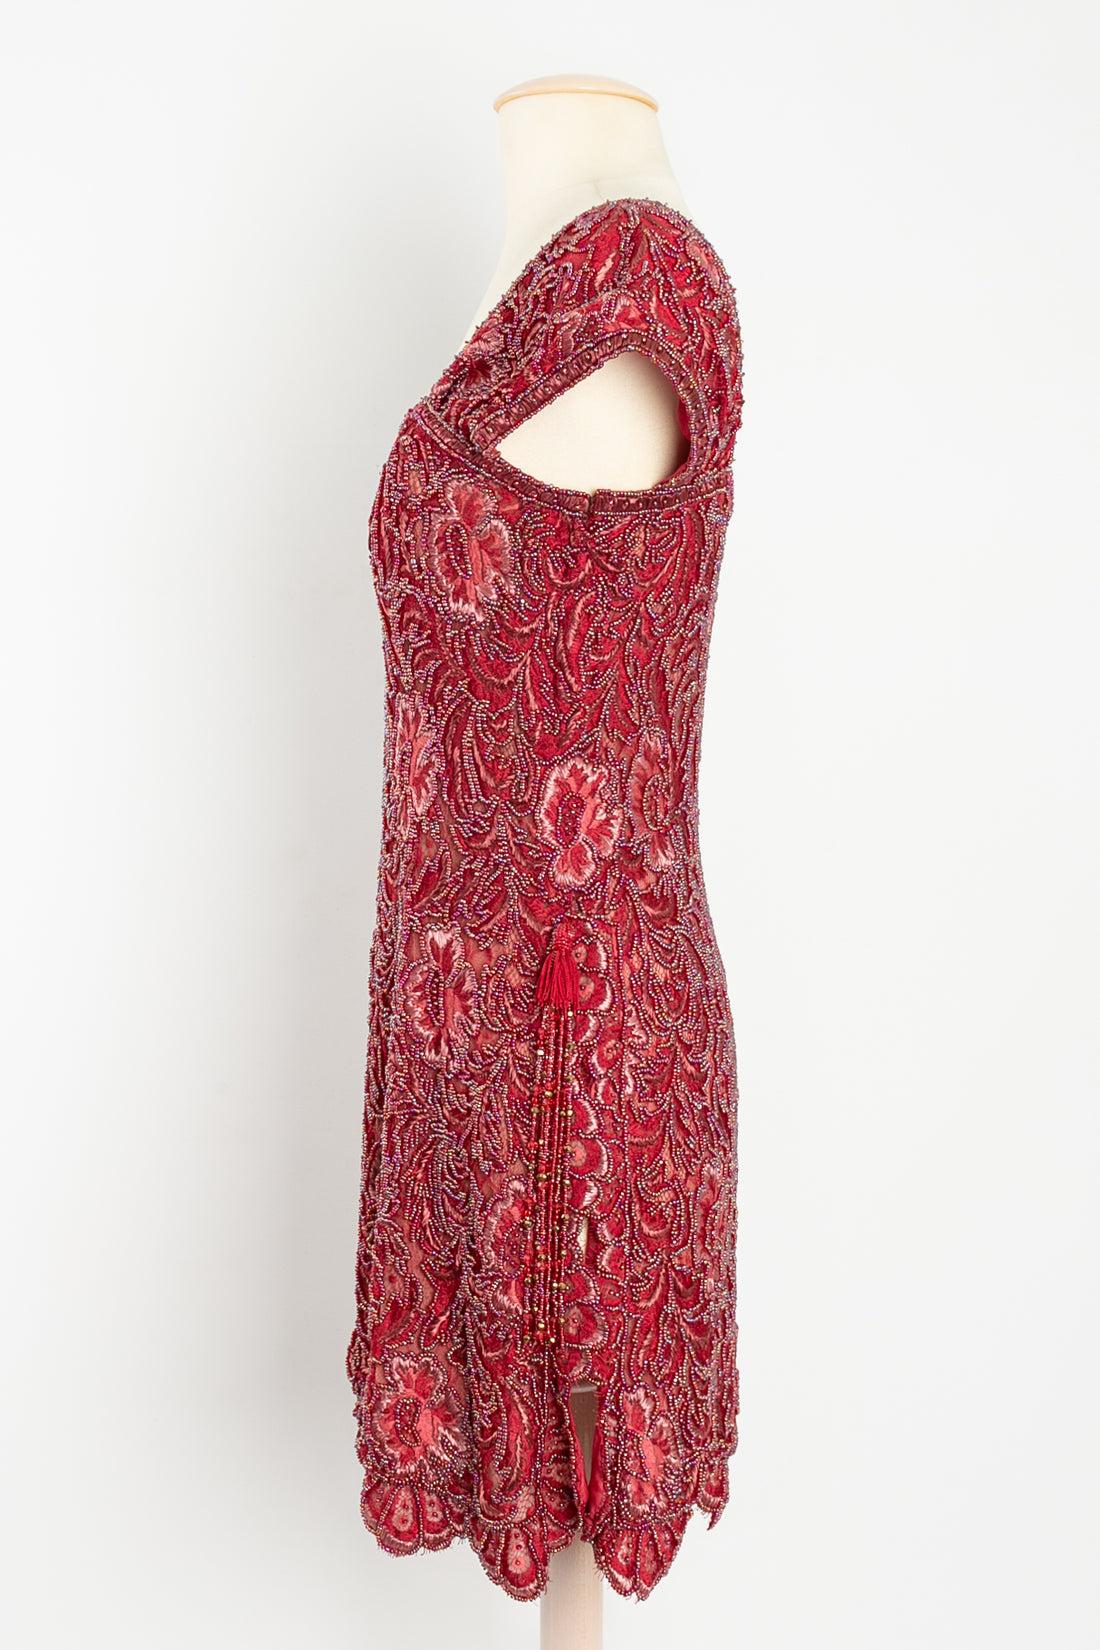 Ungaro-Emanuel Ungaro Couture - Paris Bolduc: 3194-5-94 Dress composed of three red and beige silk linings fully embroidered with red beads, woven threads and raffia in a foliage and flower pattern. No size label shown, fits a 36FR.

Additional